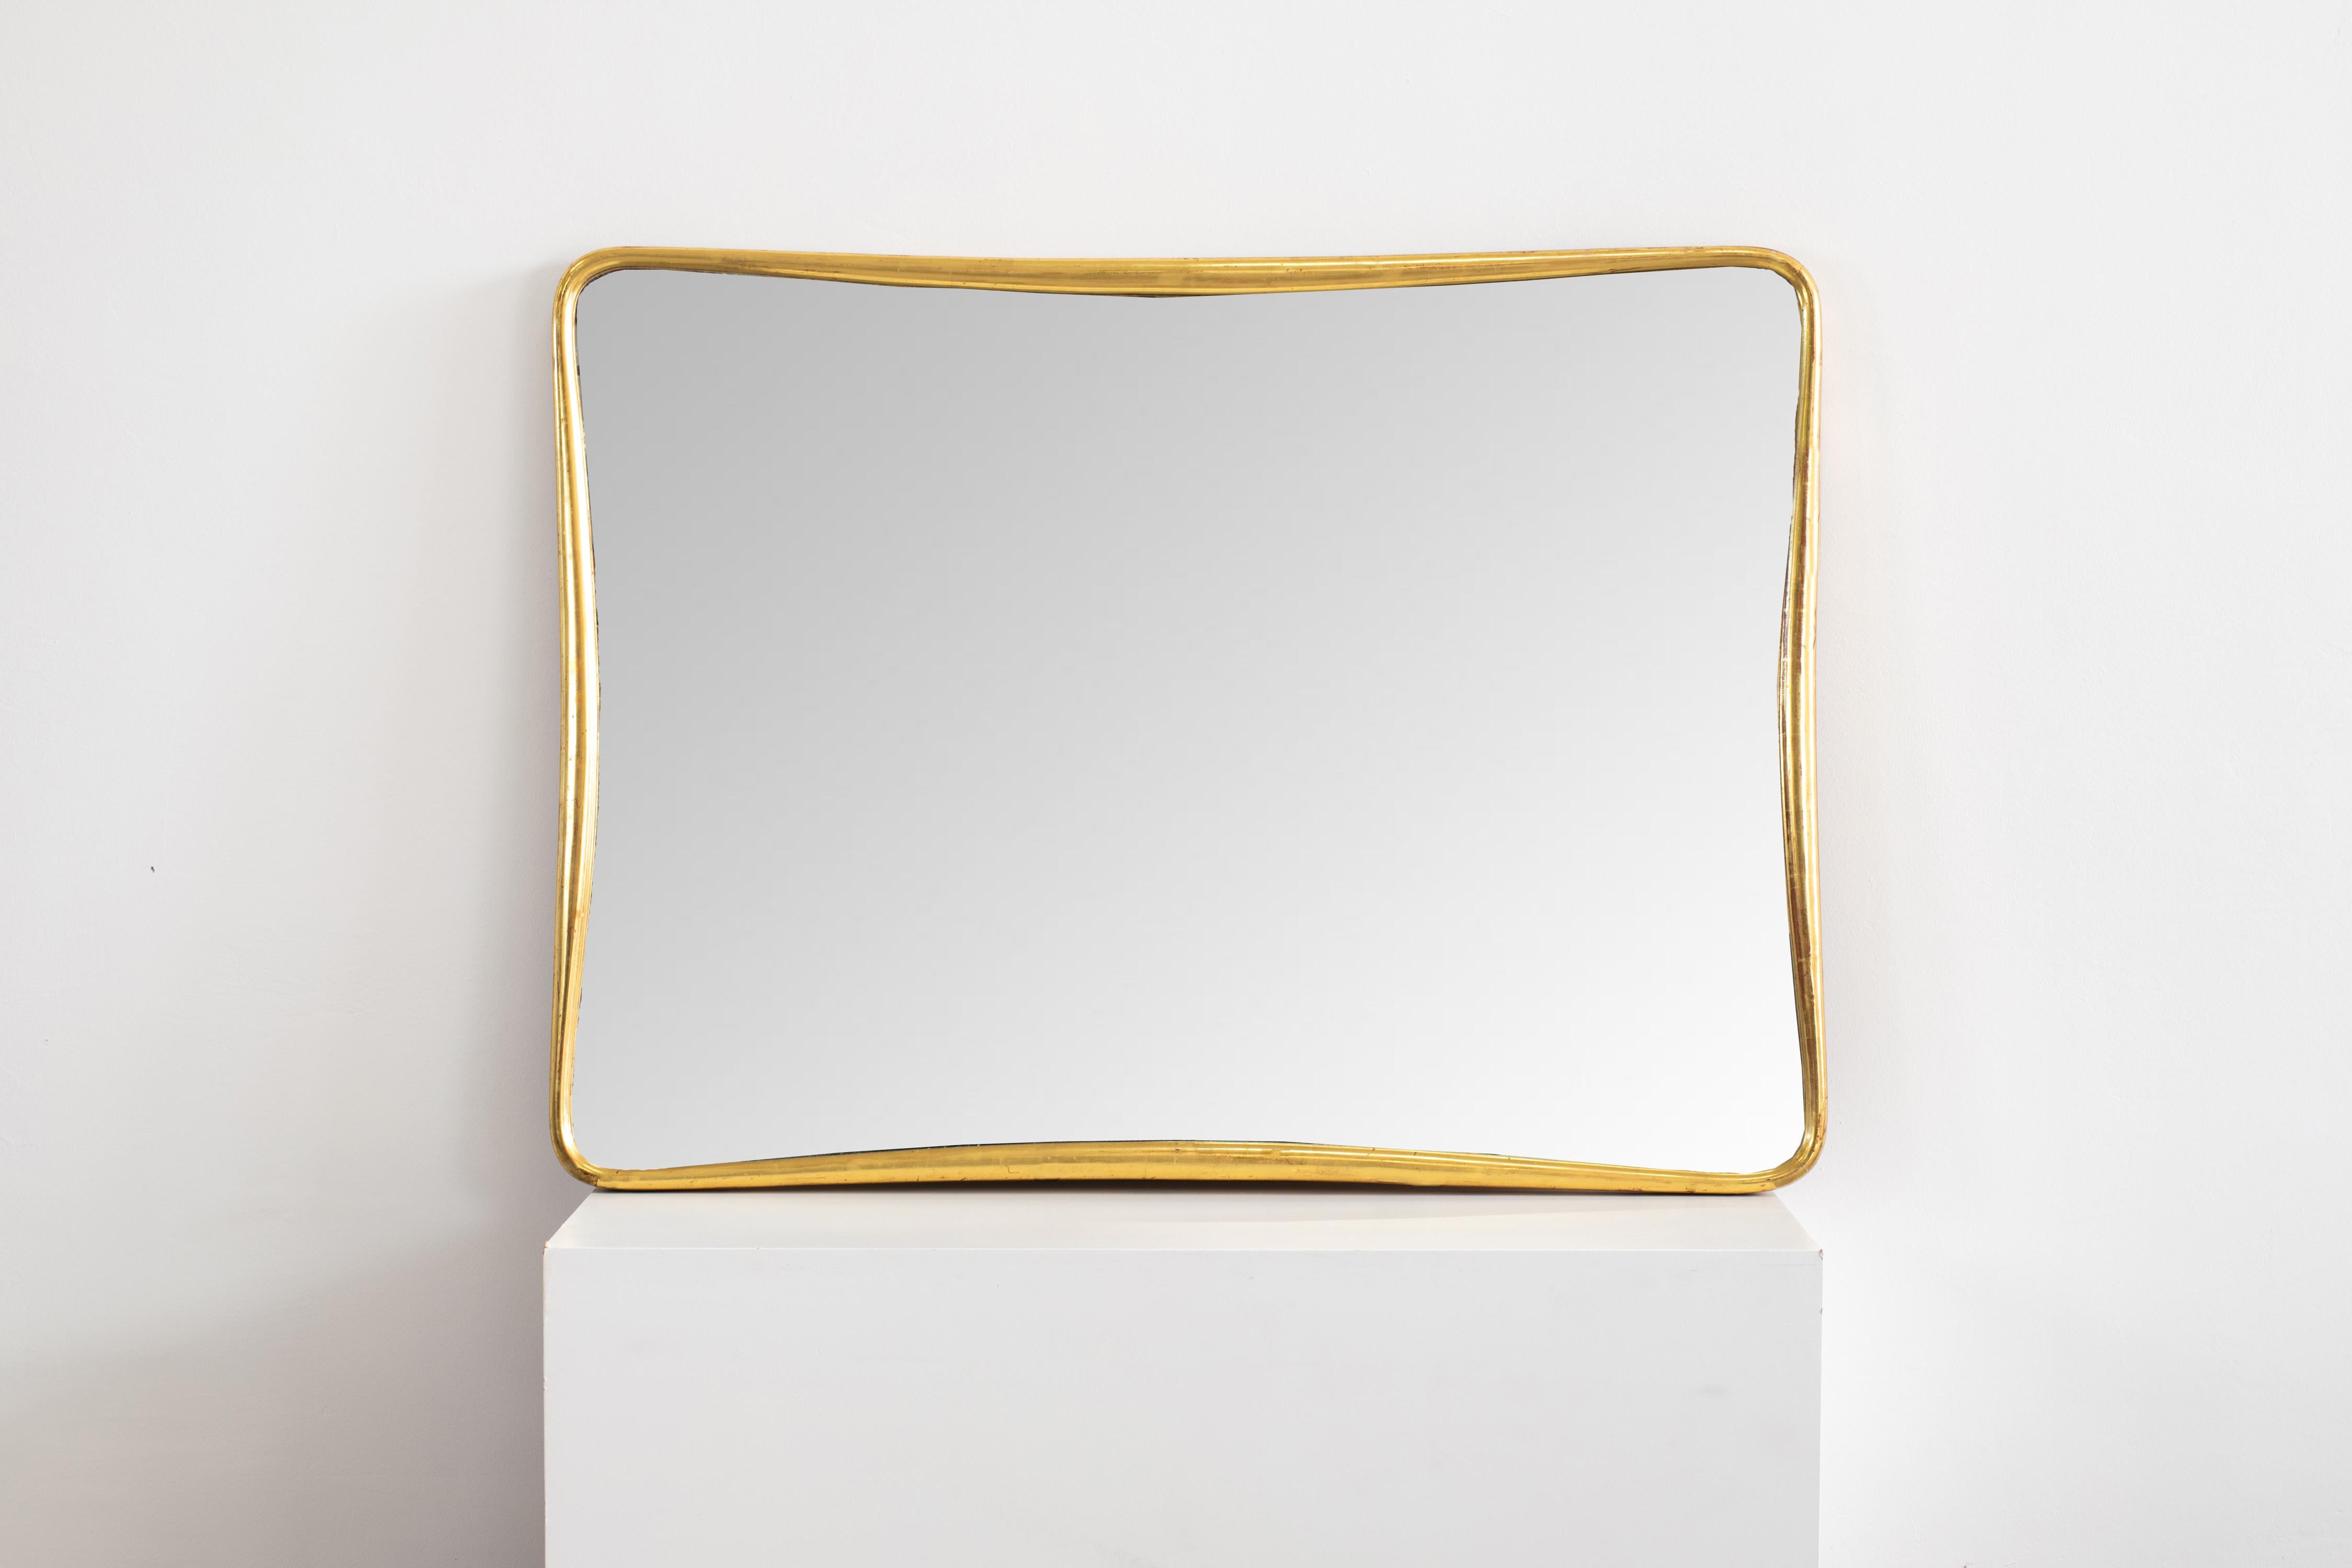 Osvaldo Borsani, mirrored crystal with a wooden golden frame.
ABV production, the 1950s.

